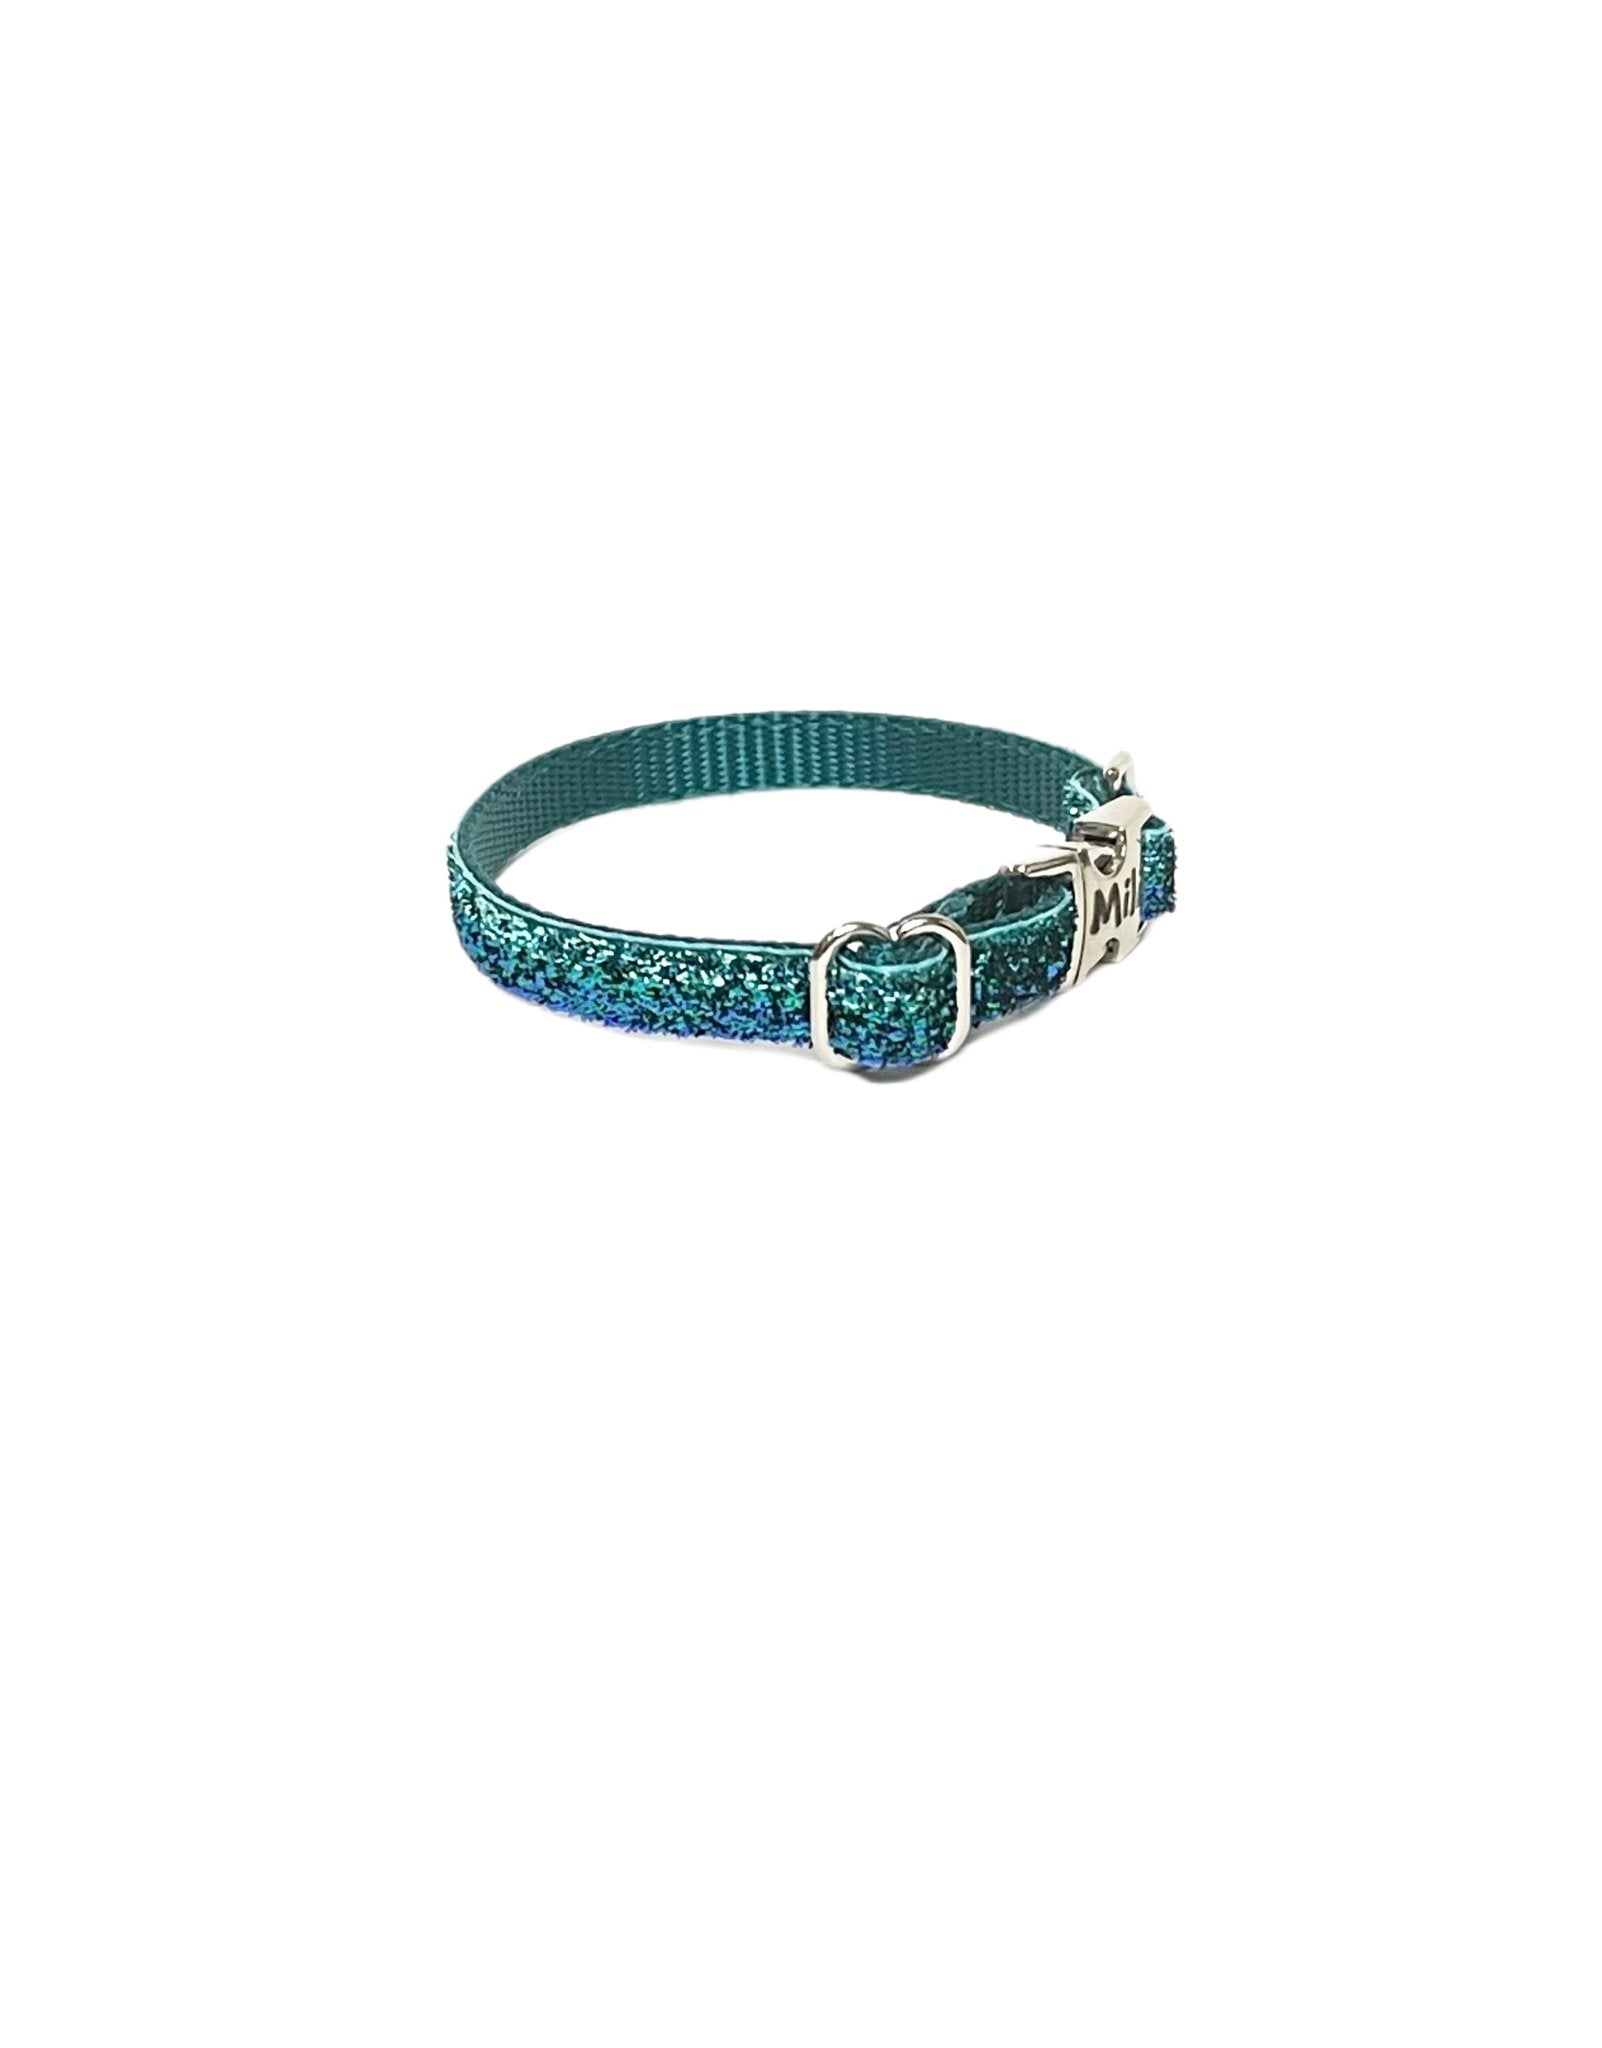 Teal ombre engraved tiny dog collar